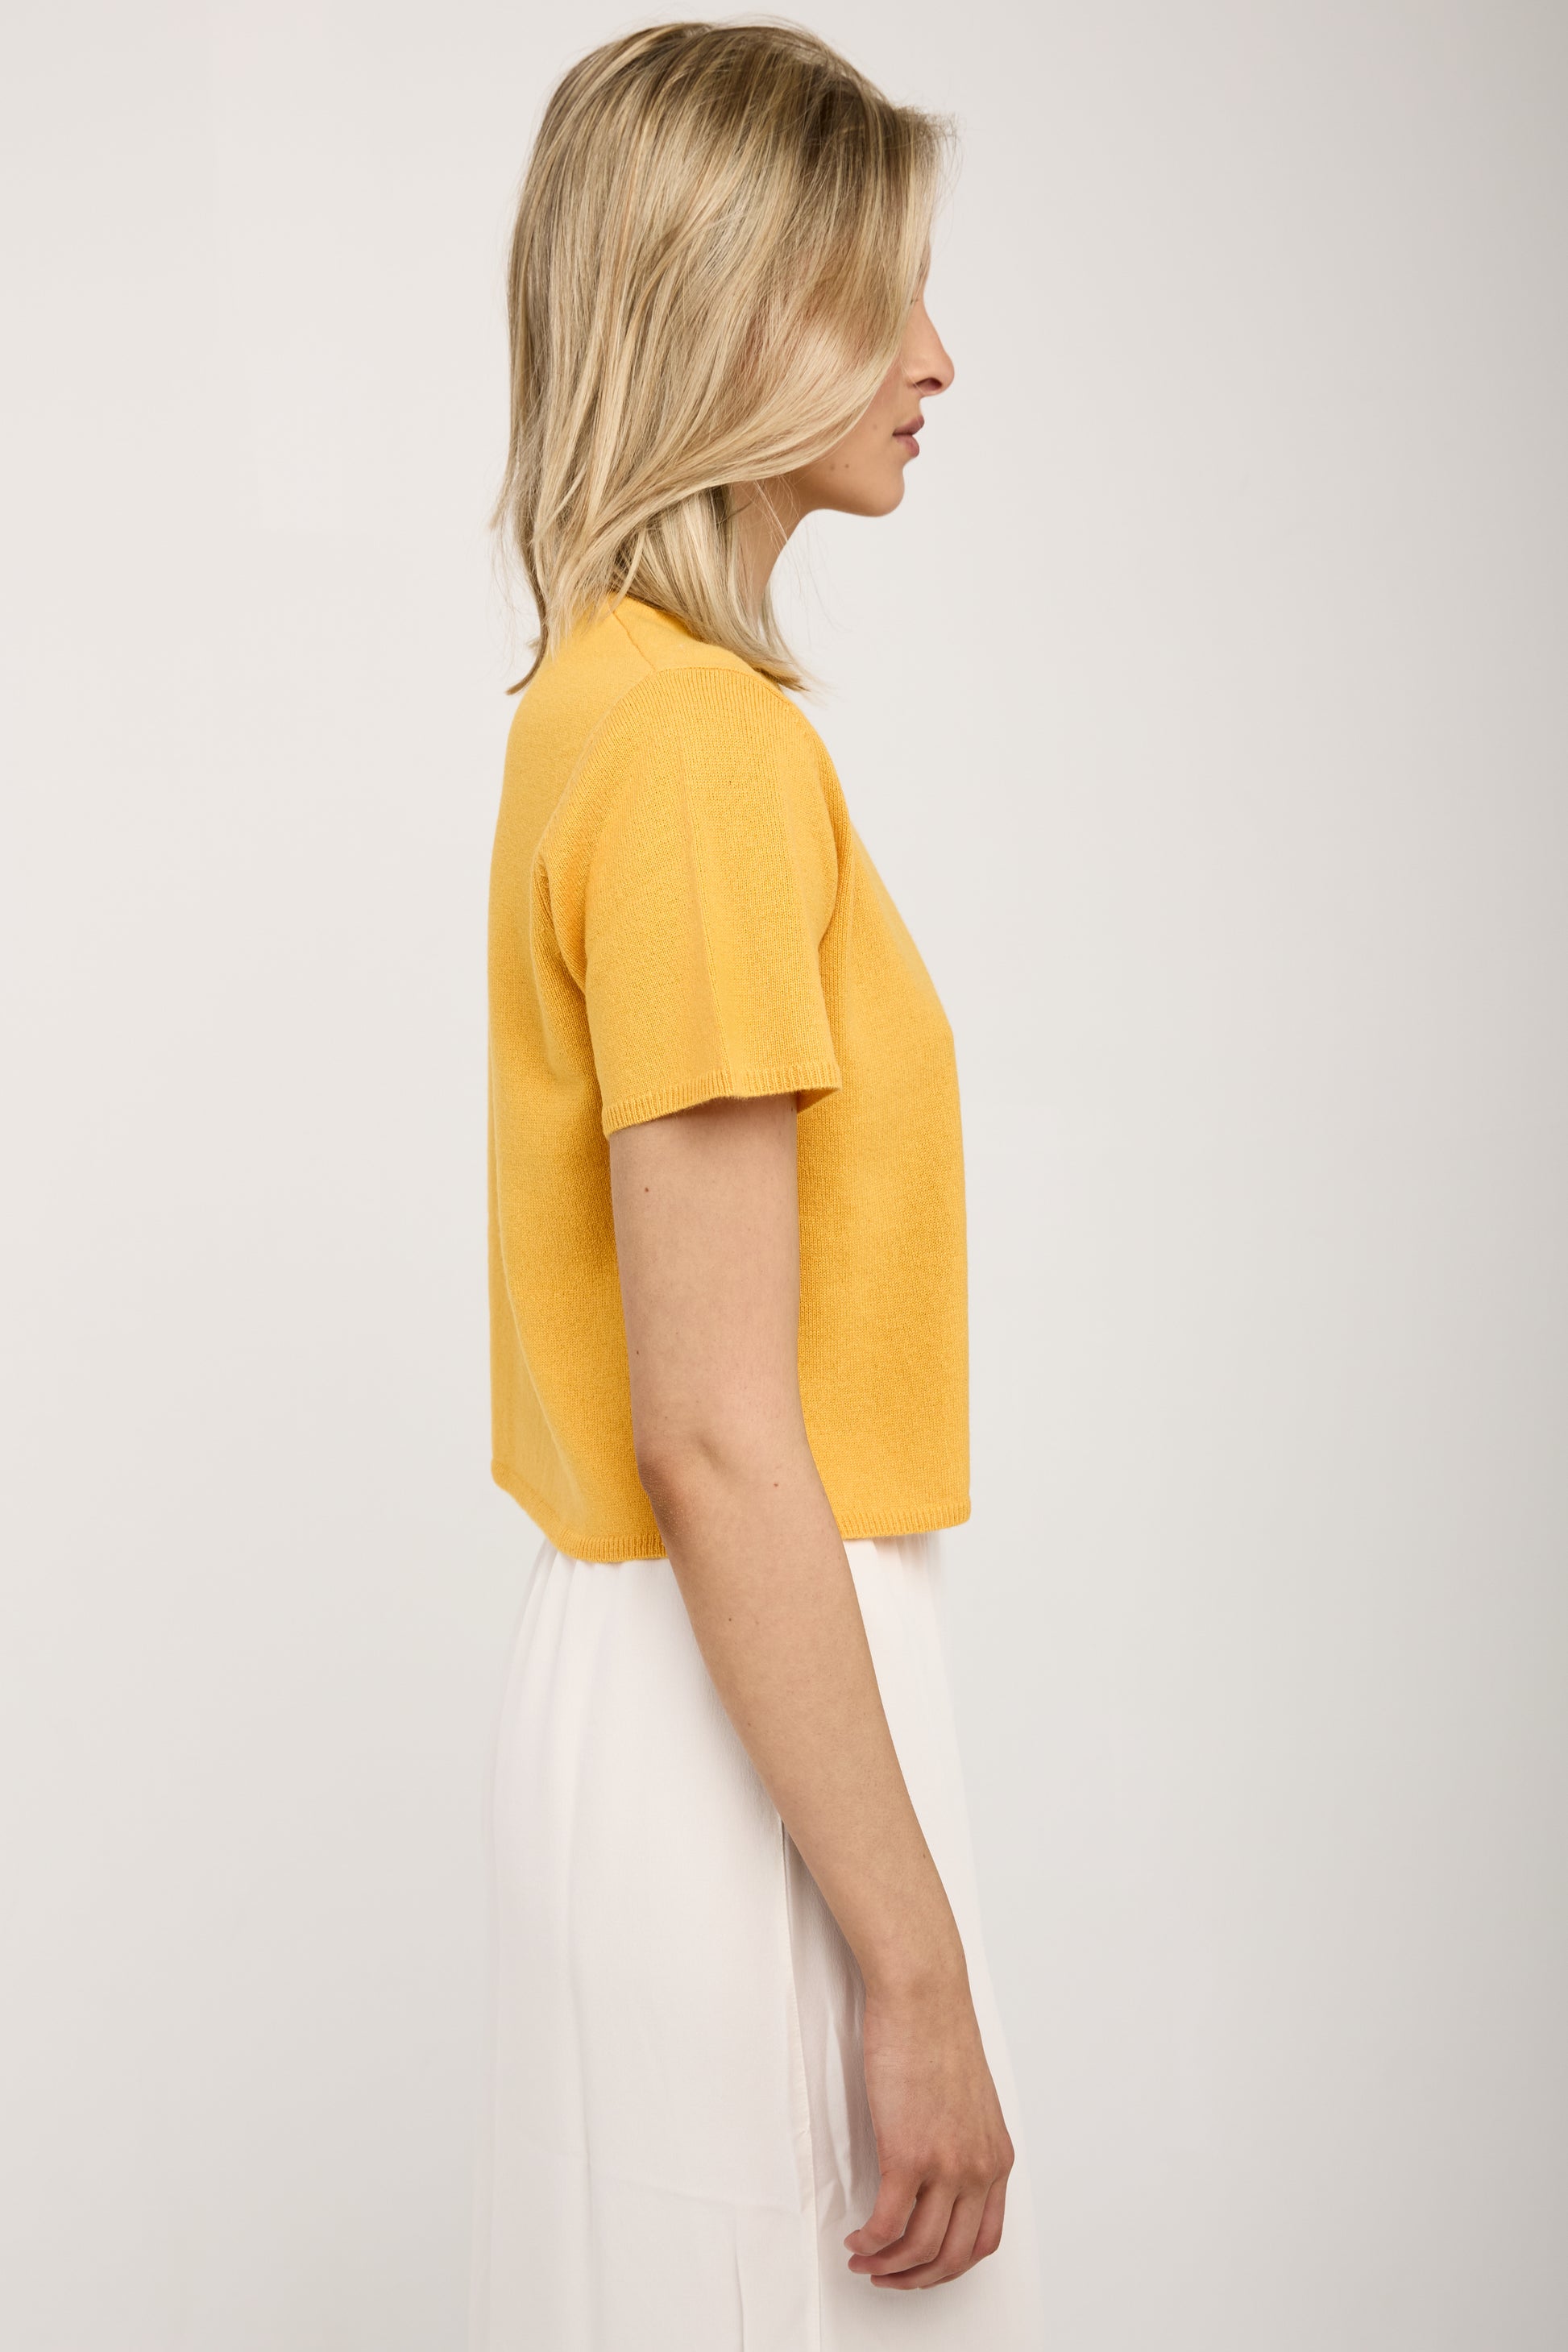 SABLYN Charleston Short Sleeve Cashmere Top in Marzipan